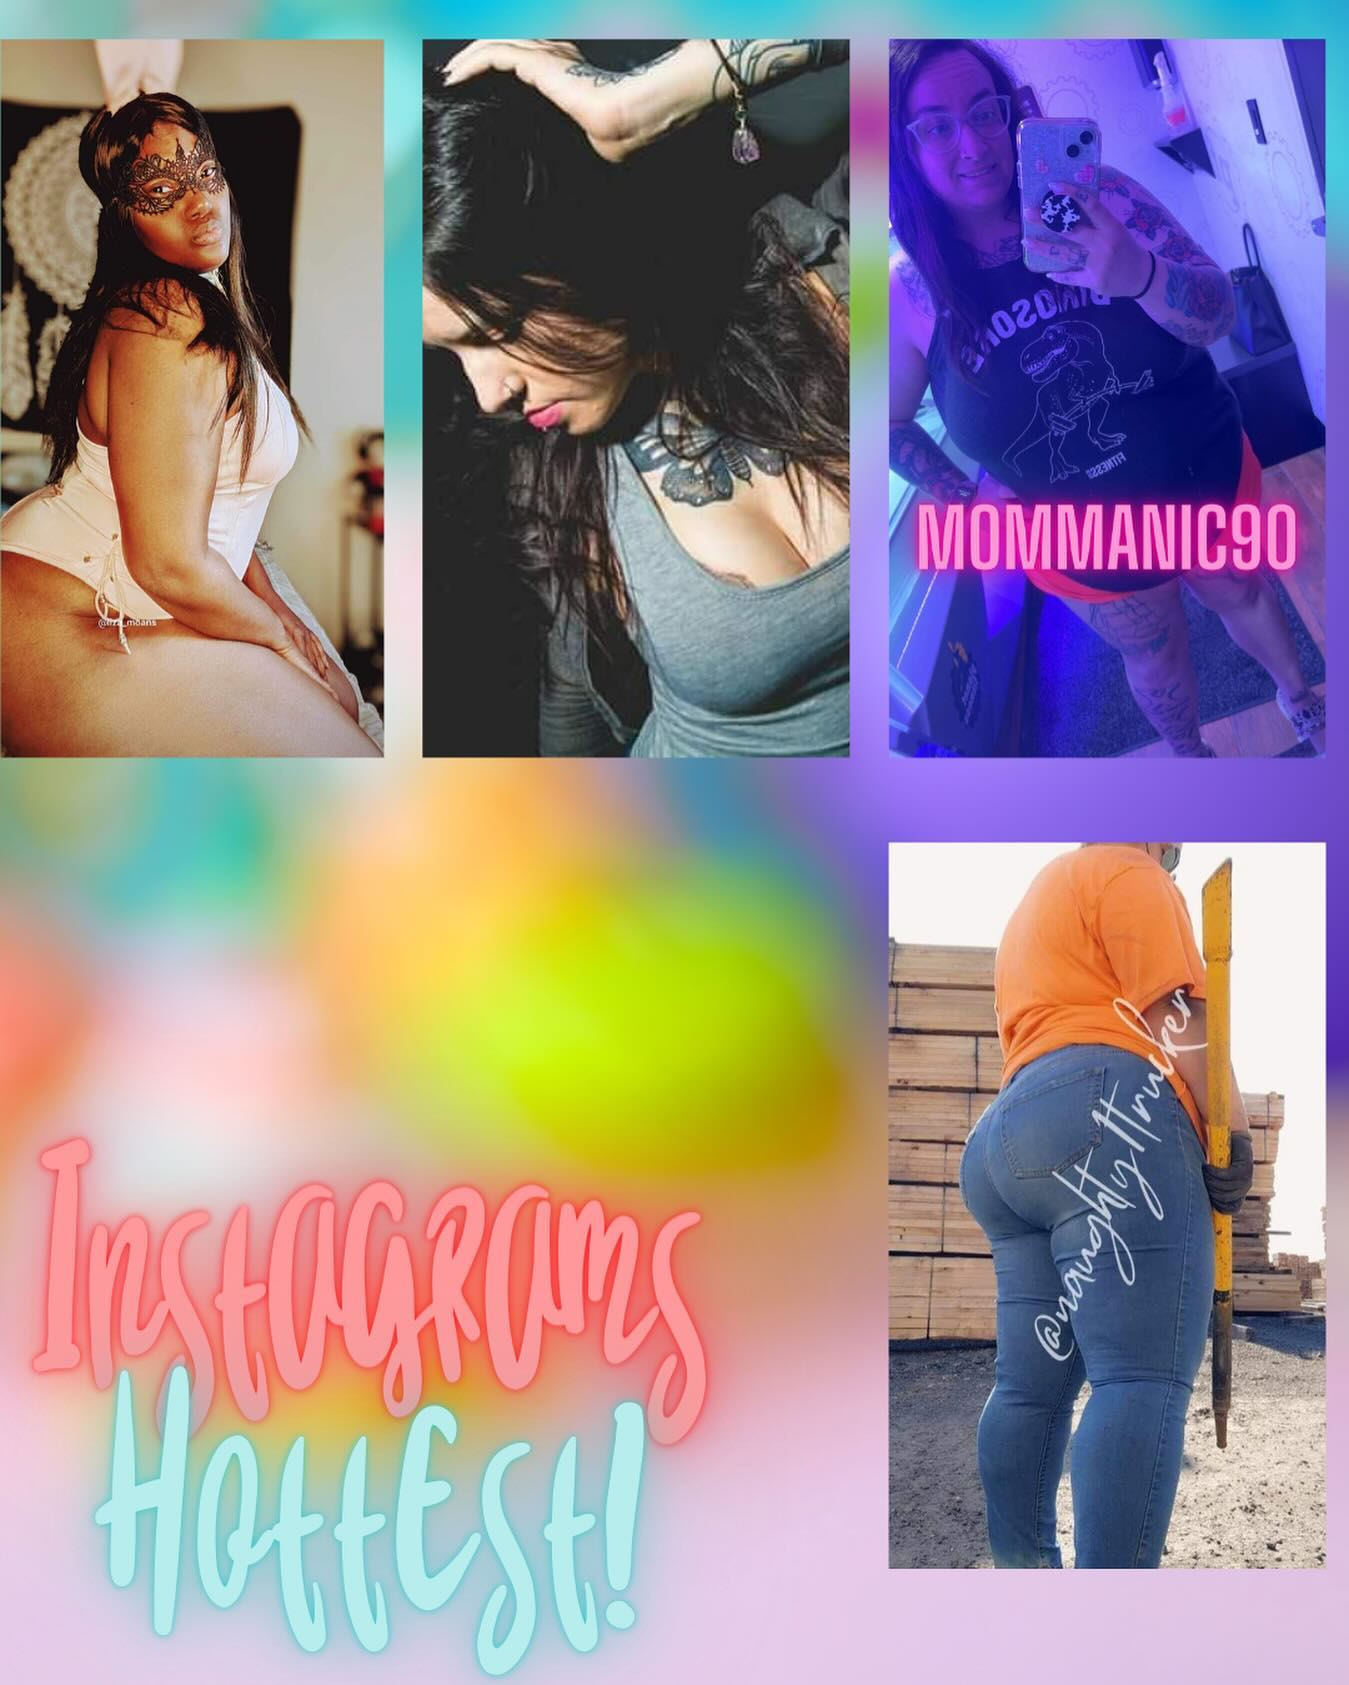 Instagrams hottest list just posted! Do you follow them? 🌶️❤️‍🔥
Top
@liza.moans
@laura_tauro
@mommanic90
Bottom 
@naughty1_trucker